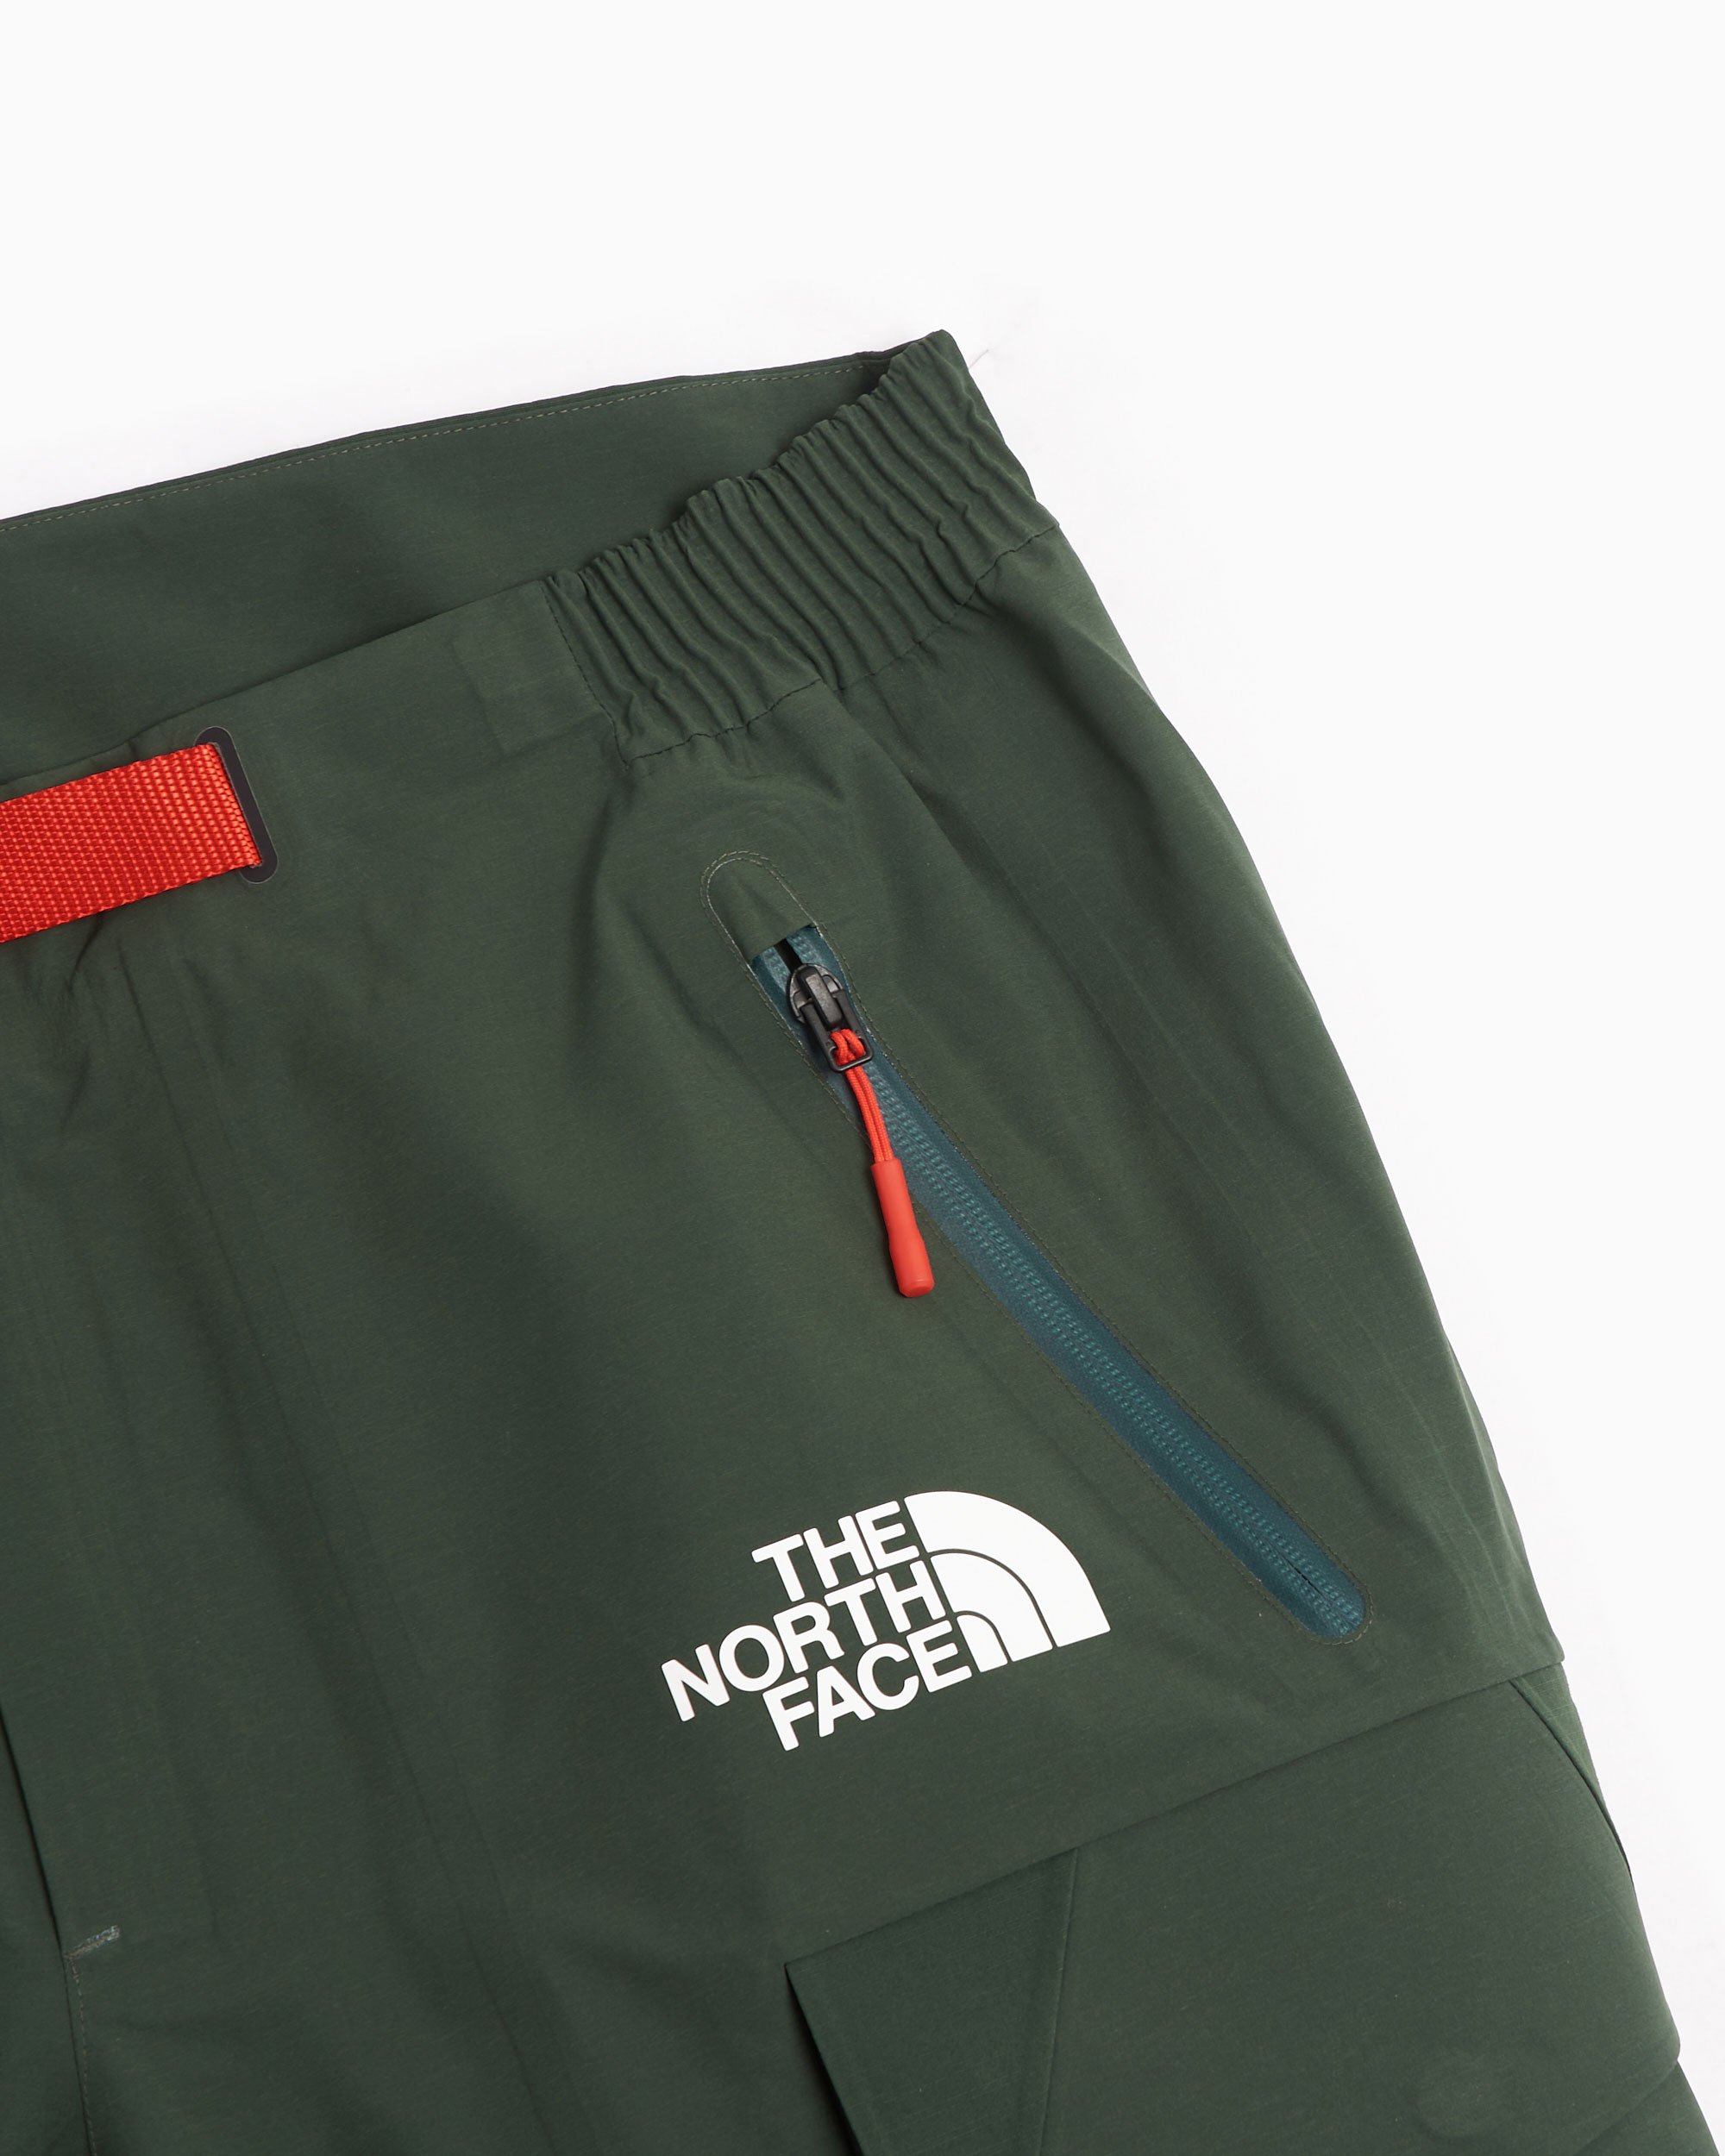 The North Face x Undercover Soukuu Geodesc Men's Pants Green 